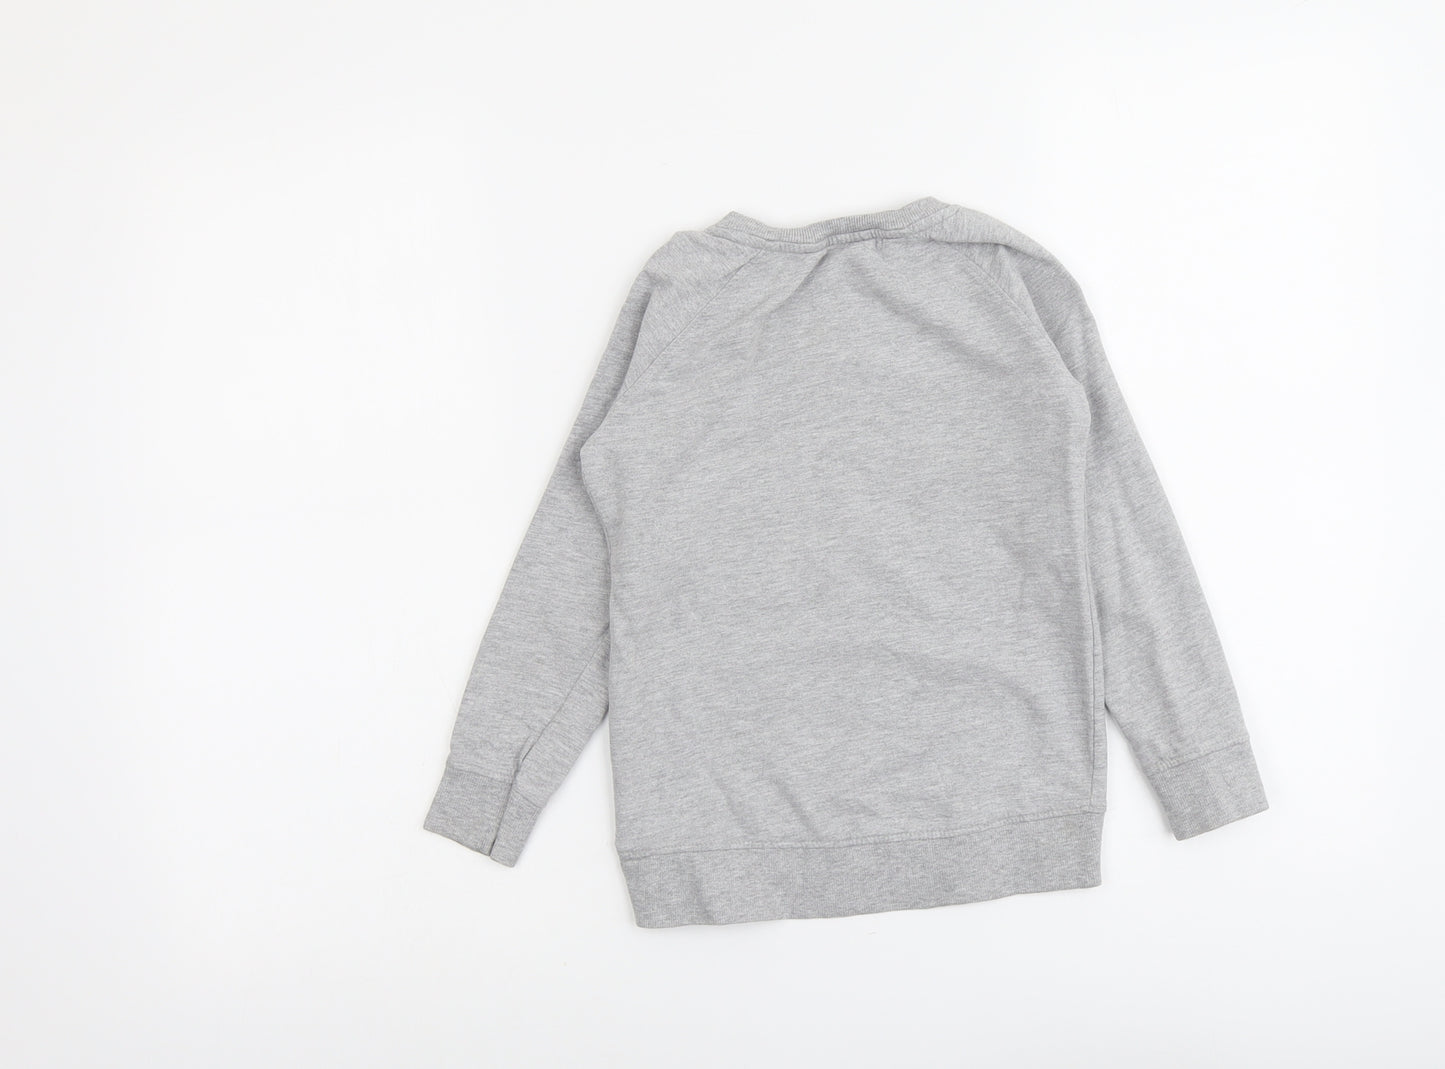 JUST FOR YOU Girls Grey Cotton Pullover Sweatshirt Size 6-7 Years Pullover - Heart